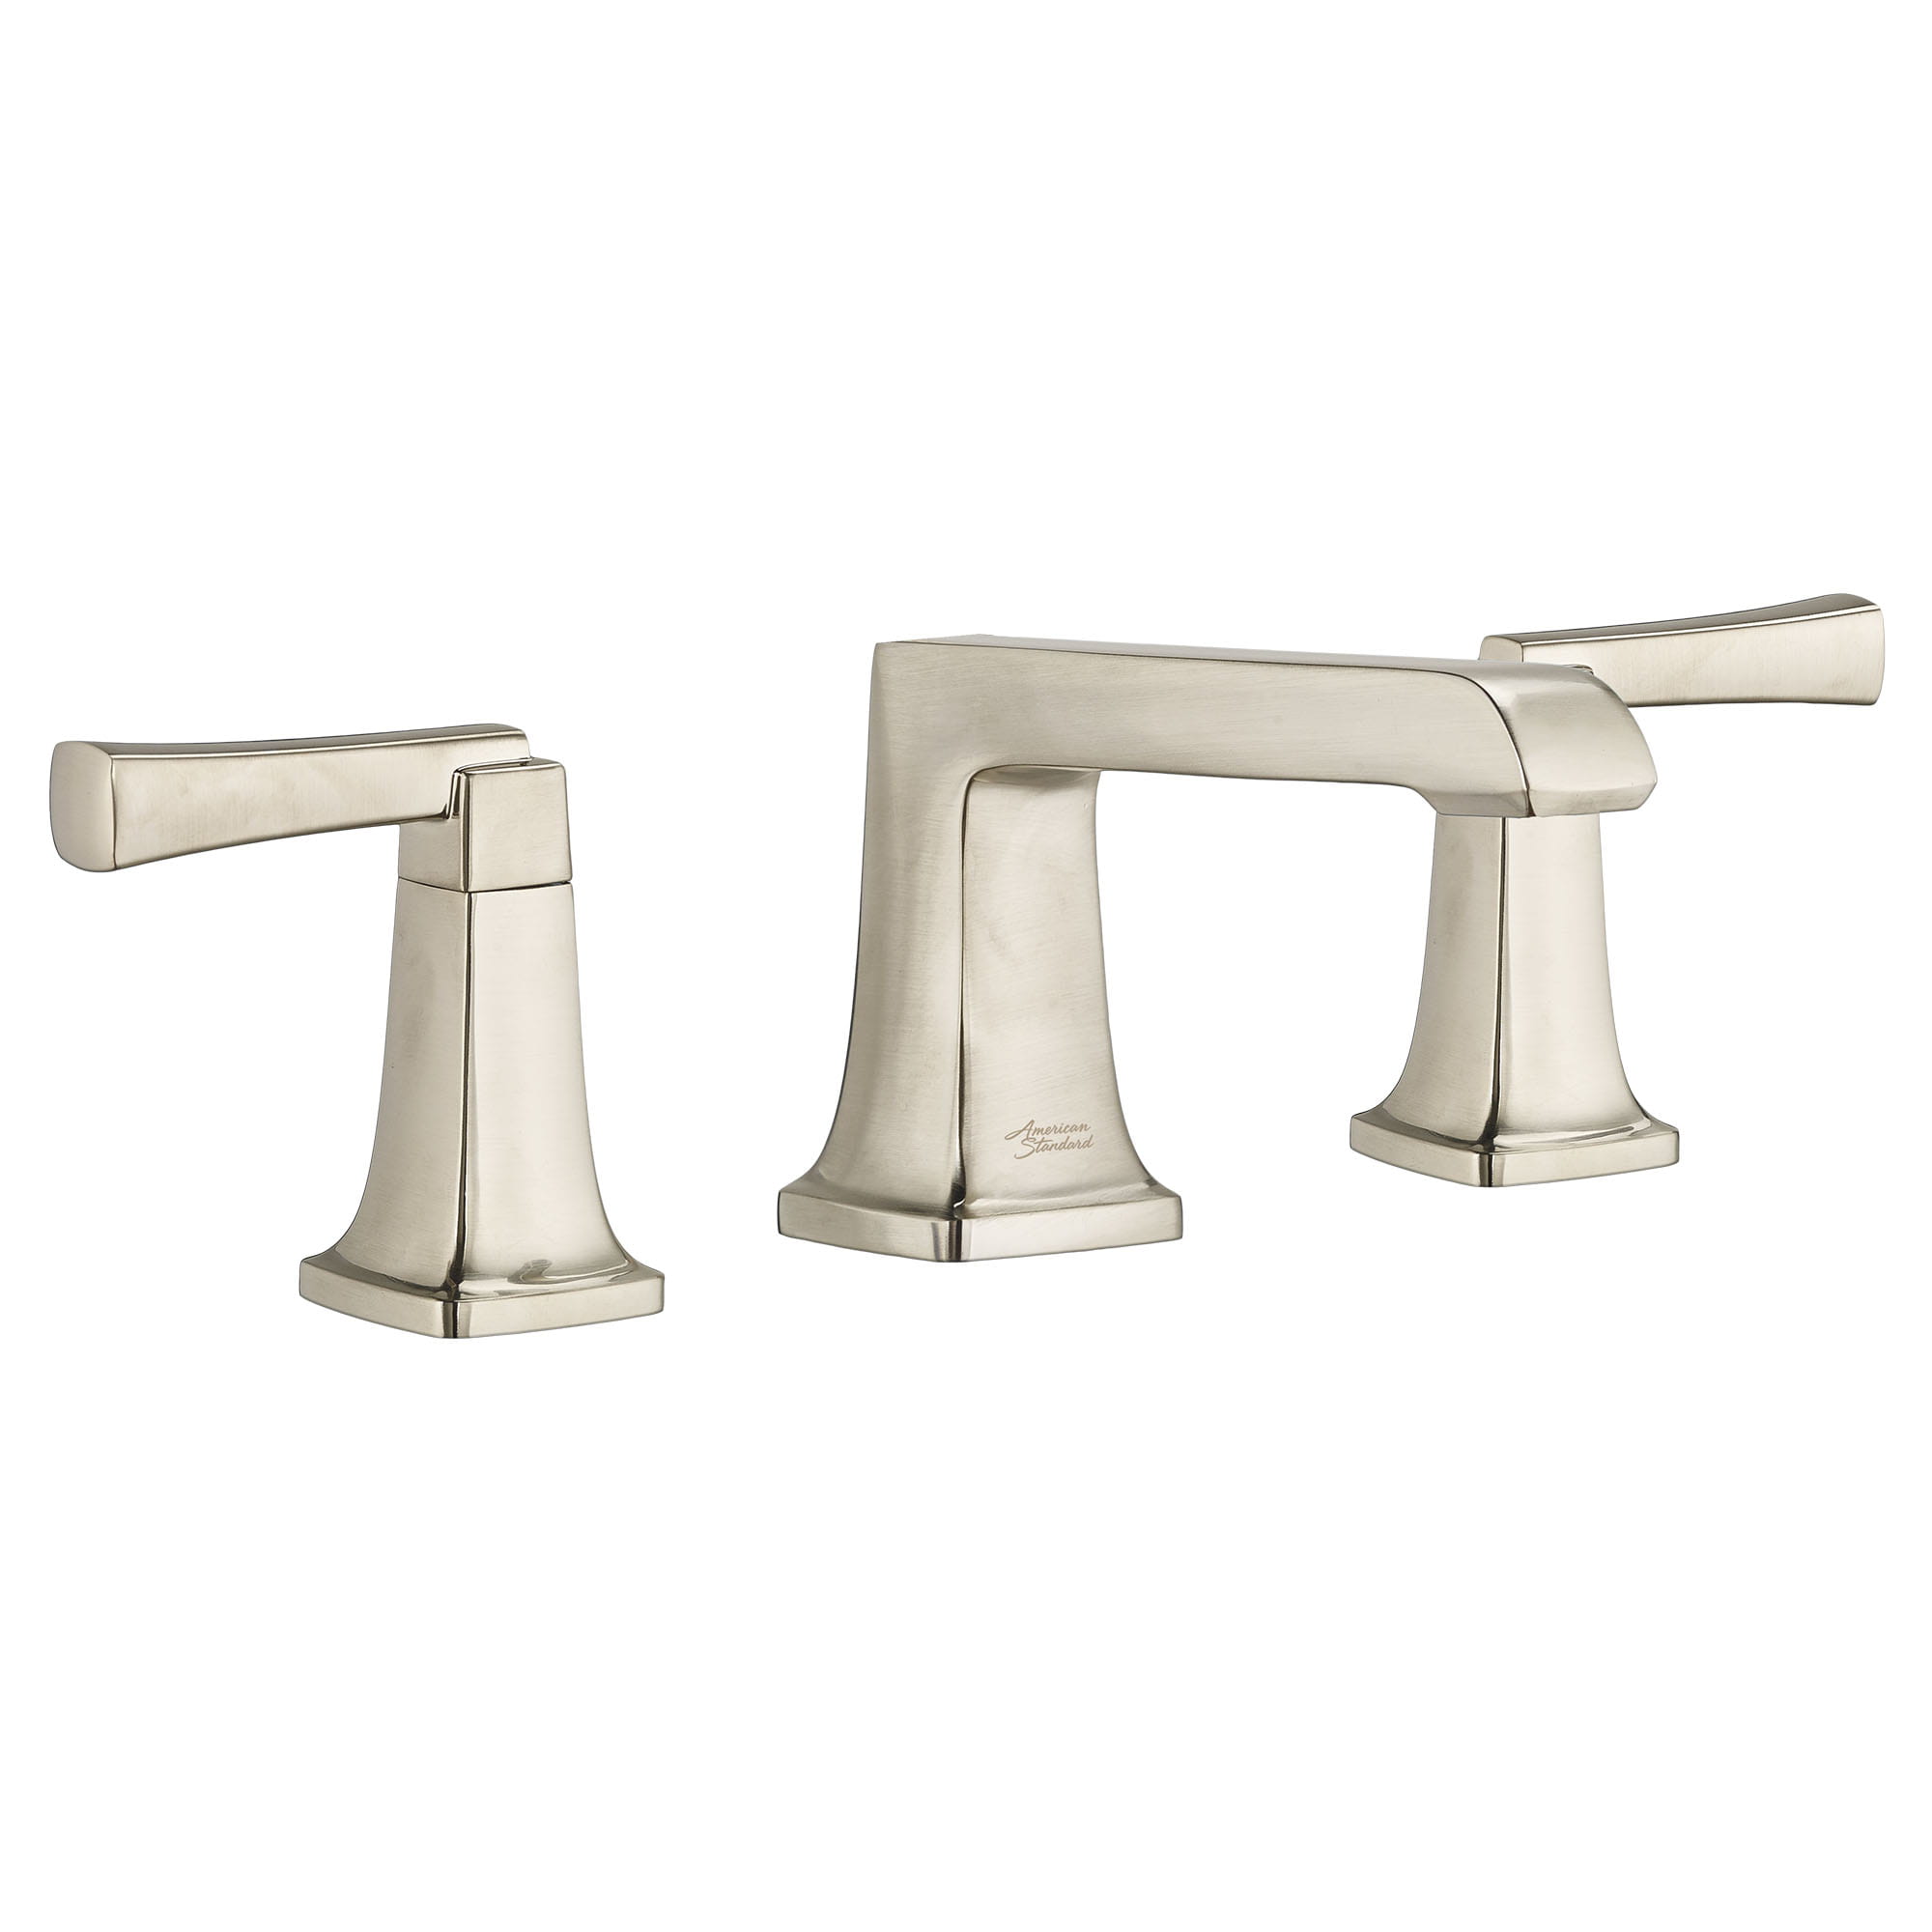 Townsend 8 Inch Widespread 2 Handle Bathroom Faucet 12 gpm 45 L min With Lever Handles   BRUSHED NICKEL